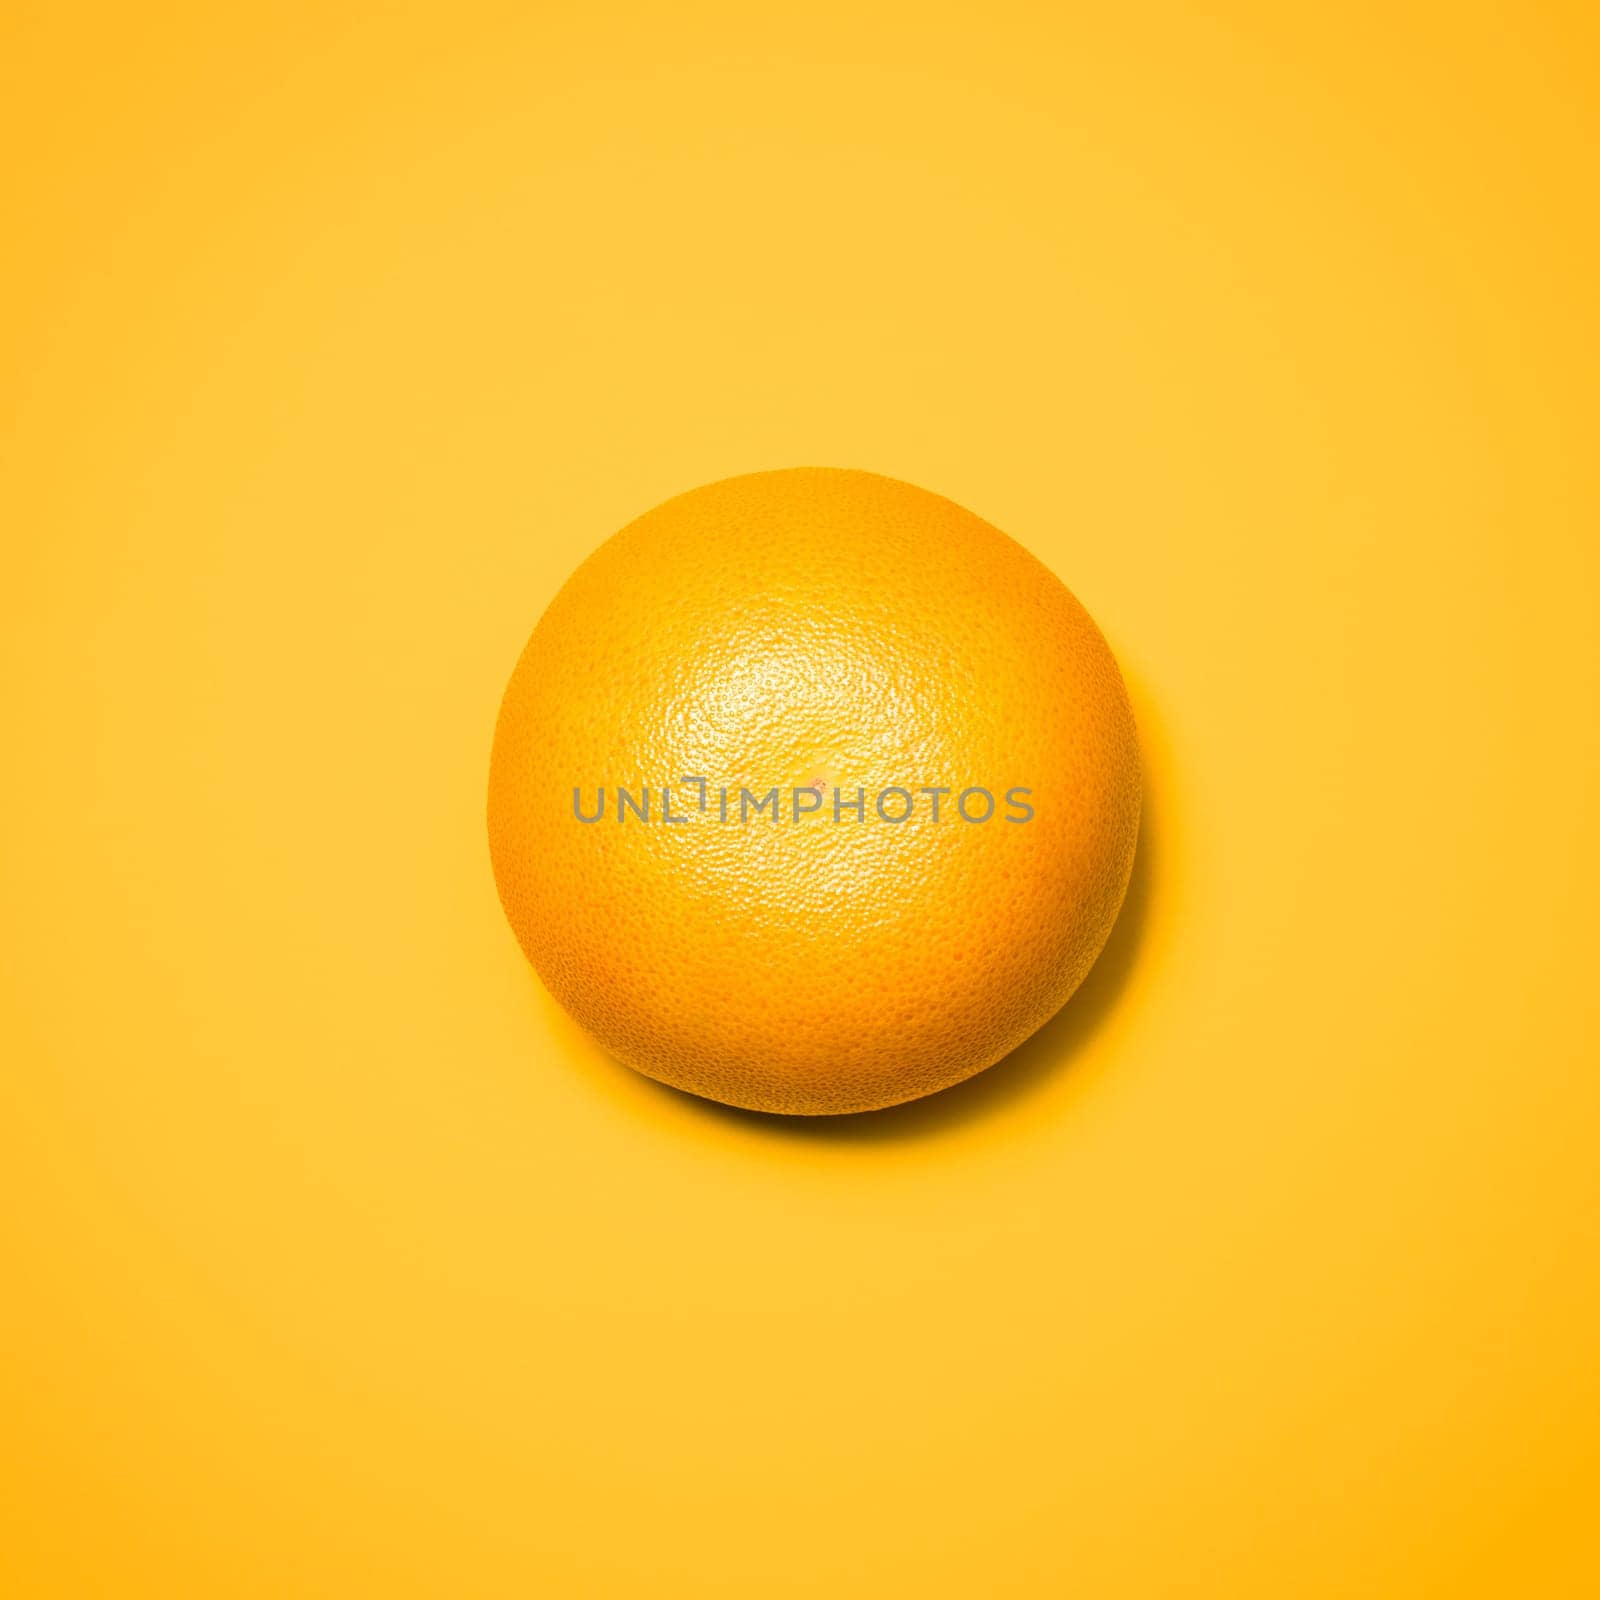 Studio, orange and fruit for diet, vitamin C and healthy nutrition on isolated wallpaper or background. Food, eating organic and grocery for natural wellness, health and fruity citrus mockup by YuriArcurs